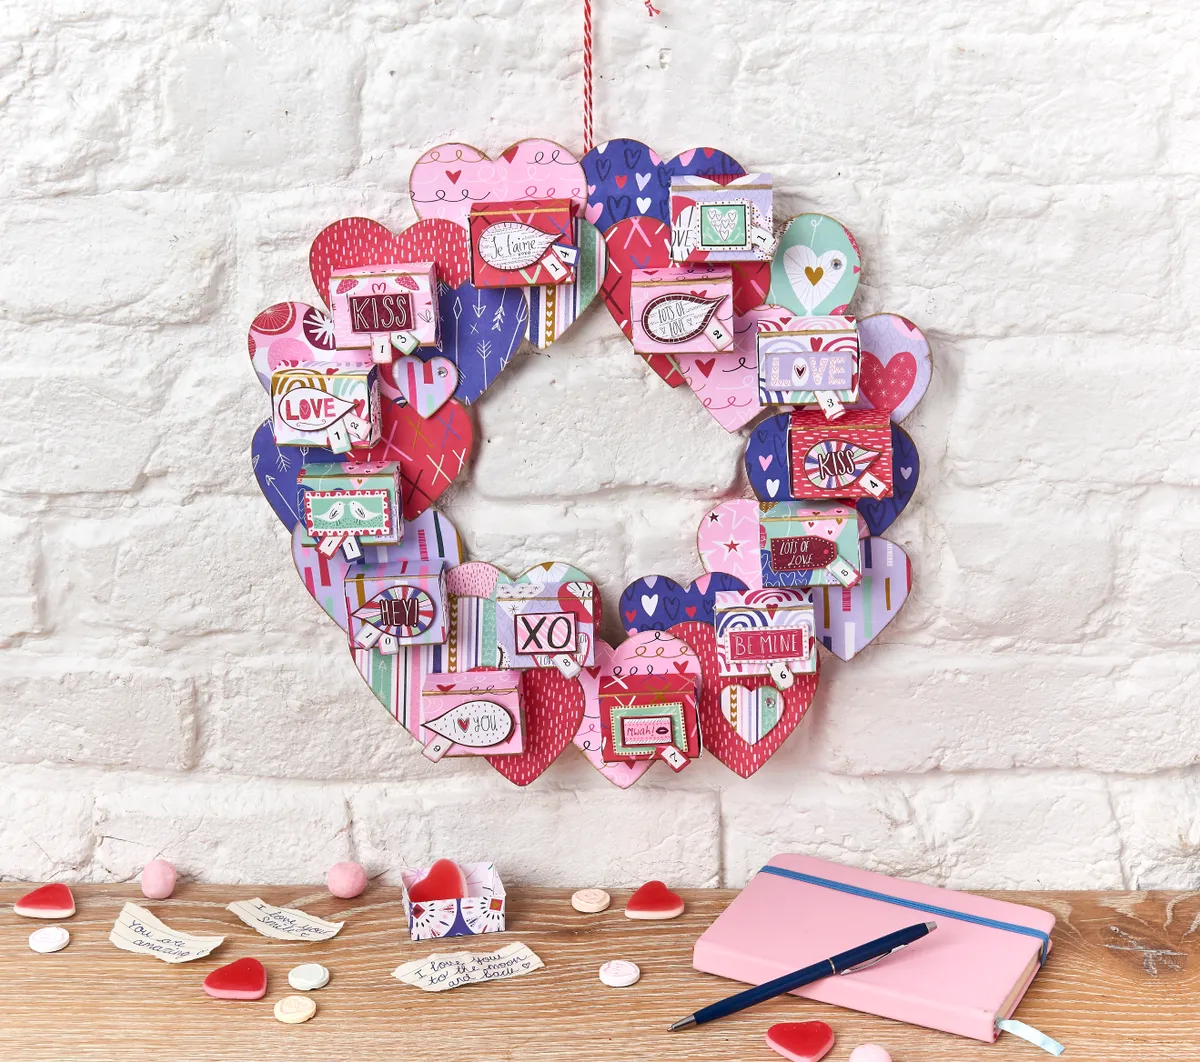 How to make a valentines wreath out of paper